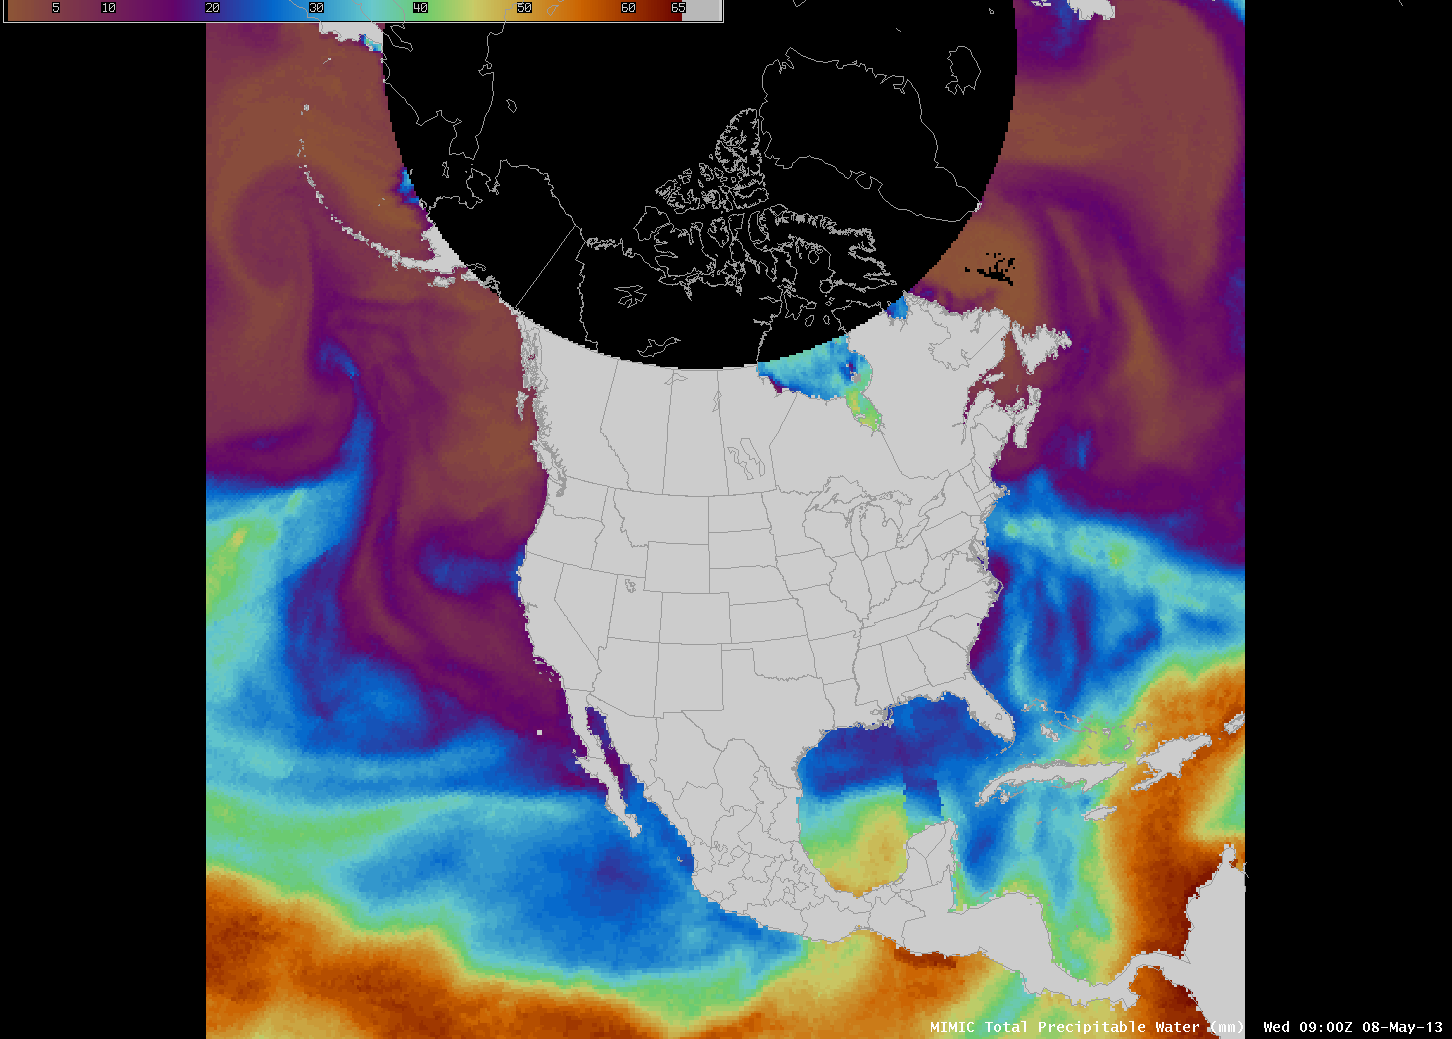 Morphed Total Precipitable Water (click image to play animation)